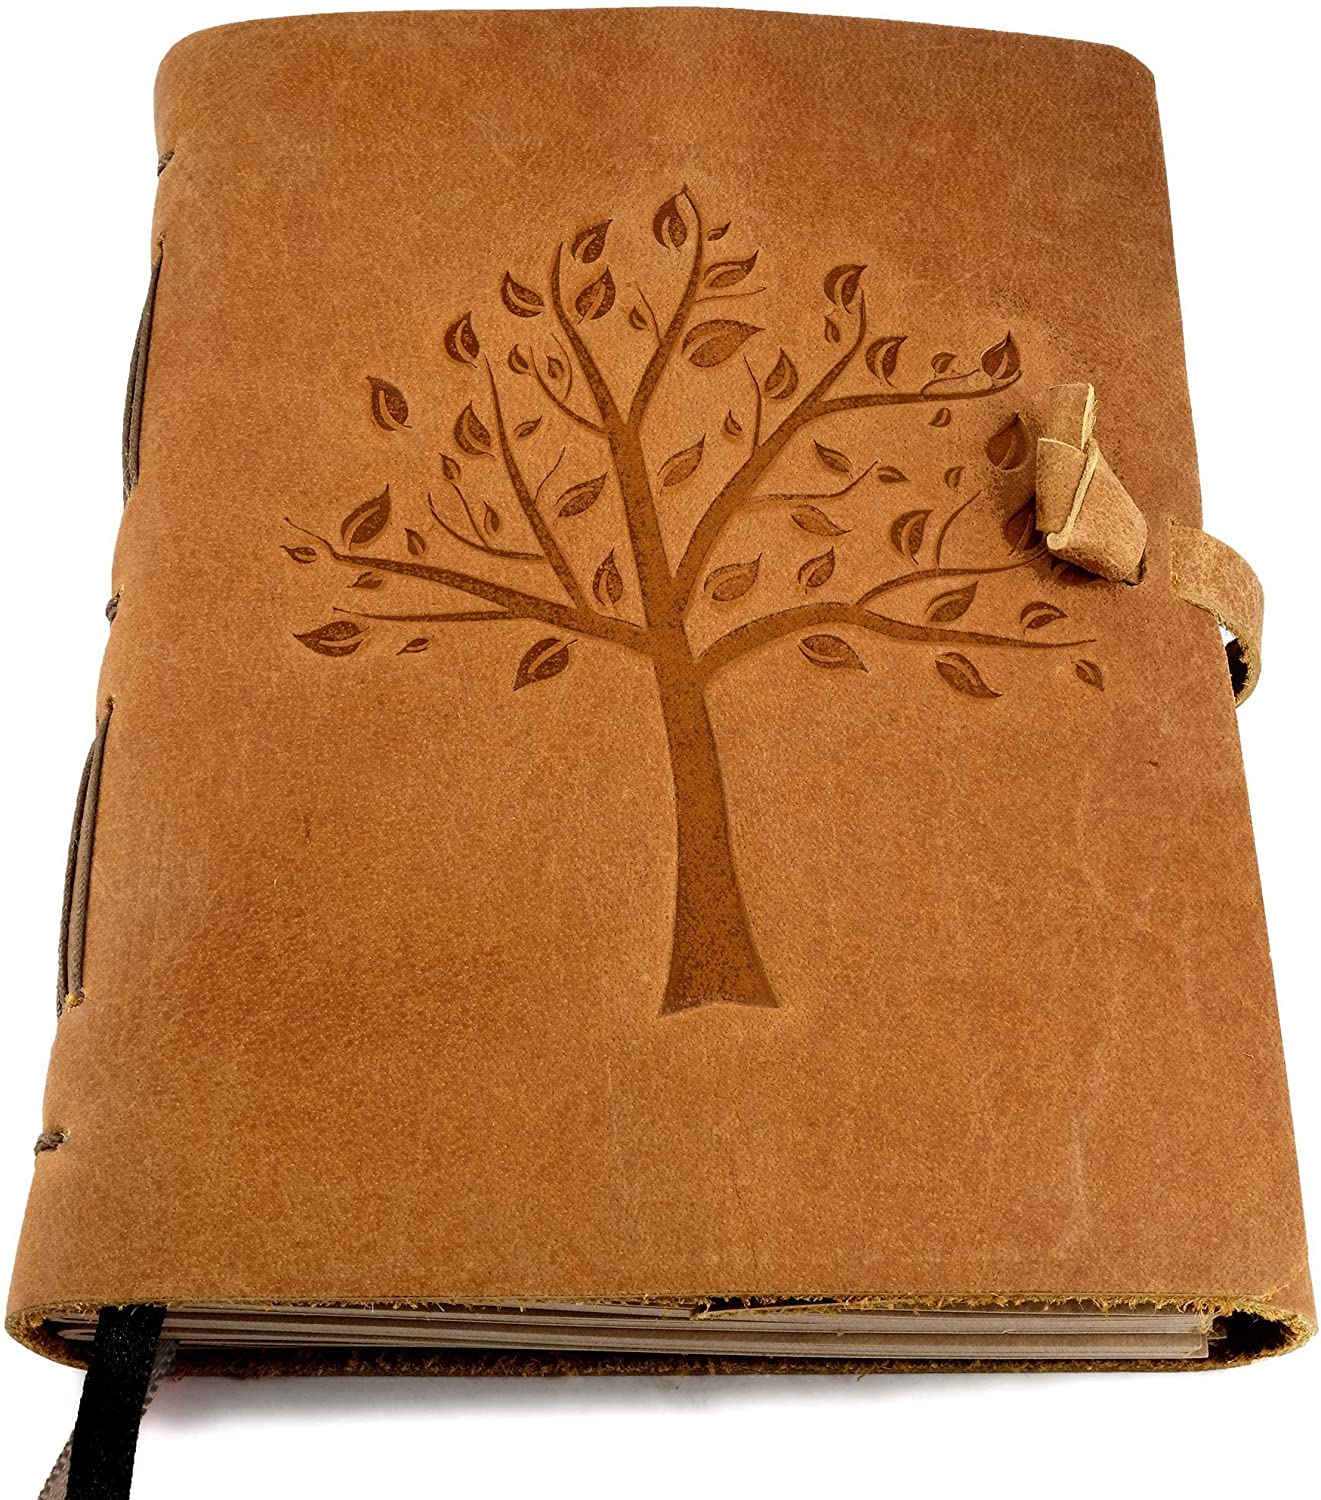 ThoughtSpace Journals: Embrace Your Creativity with the Mandala Diary - Handcrafted Leather Journal for Men & Women - image 1 of 8